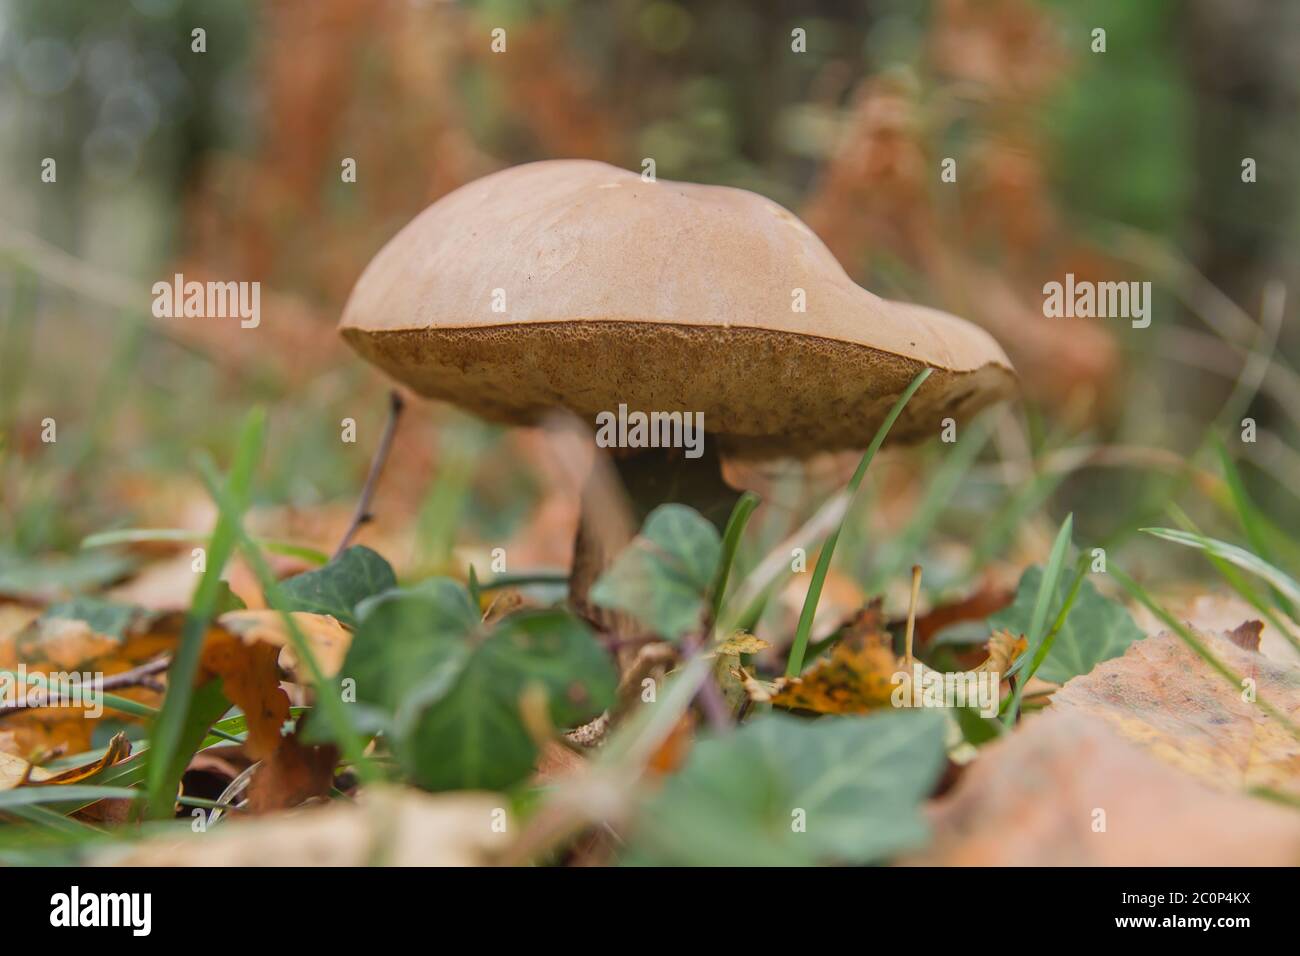 Bronze bolete edible mushroom growing wild in the autumnal forest Stock Photo